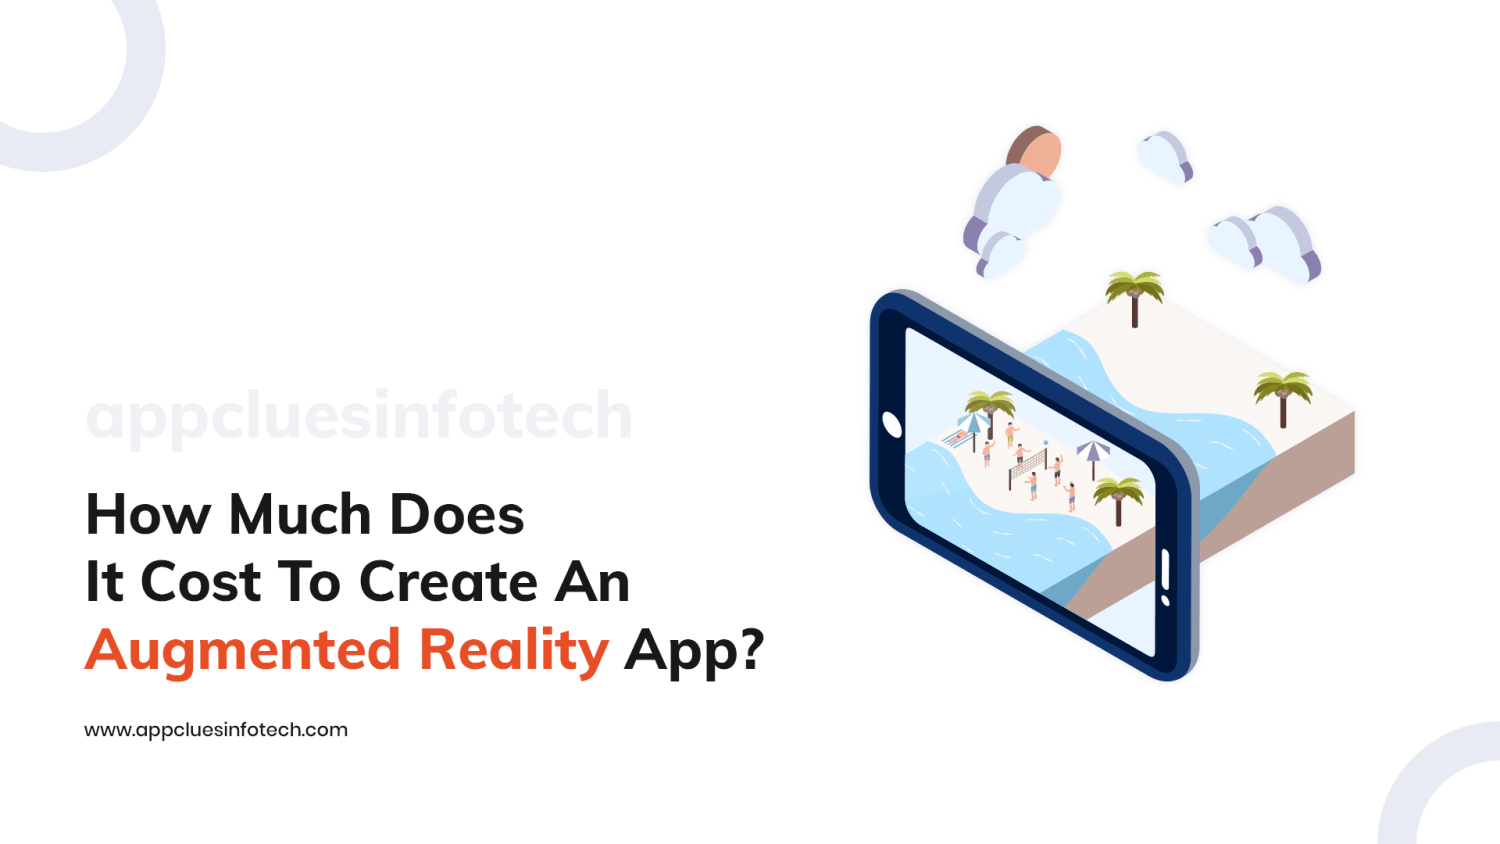 How Much Does It Cost To Create An Augmented Reality App?